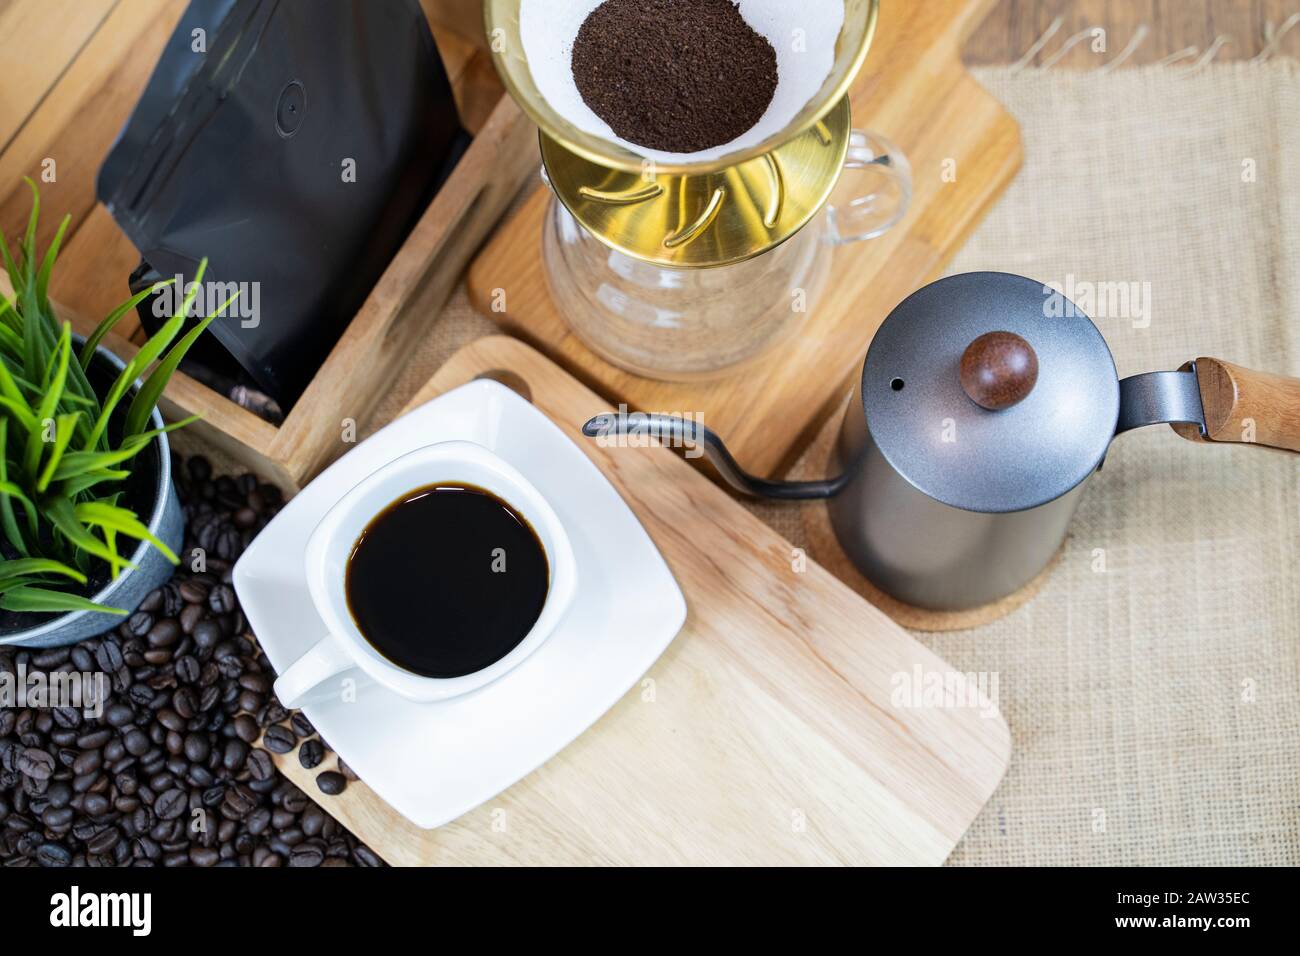 Grind the coffee beans inside the filter at the coffee level to prepare the drip coffee just like the coffee in the cup. Stock Photo